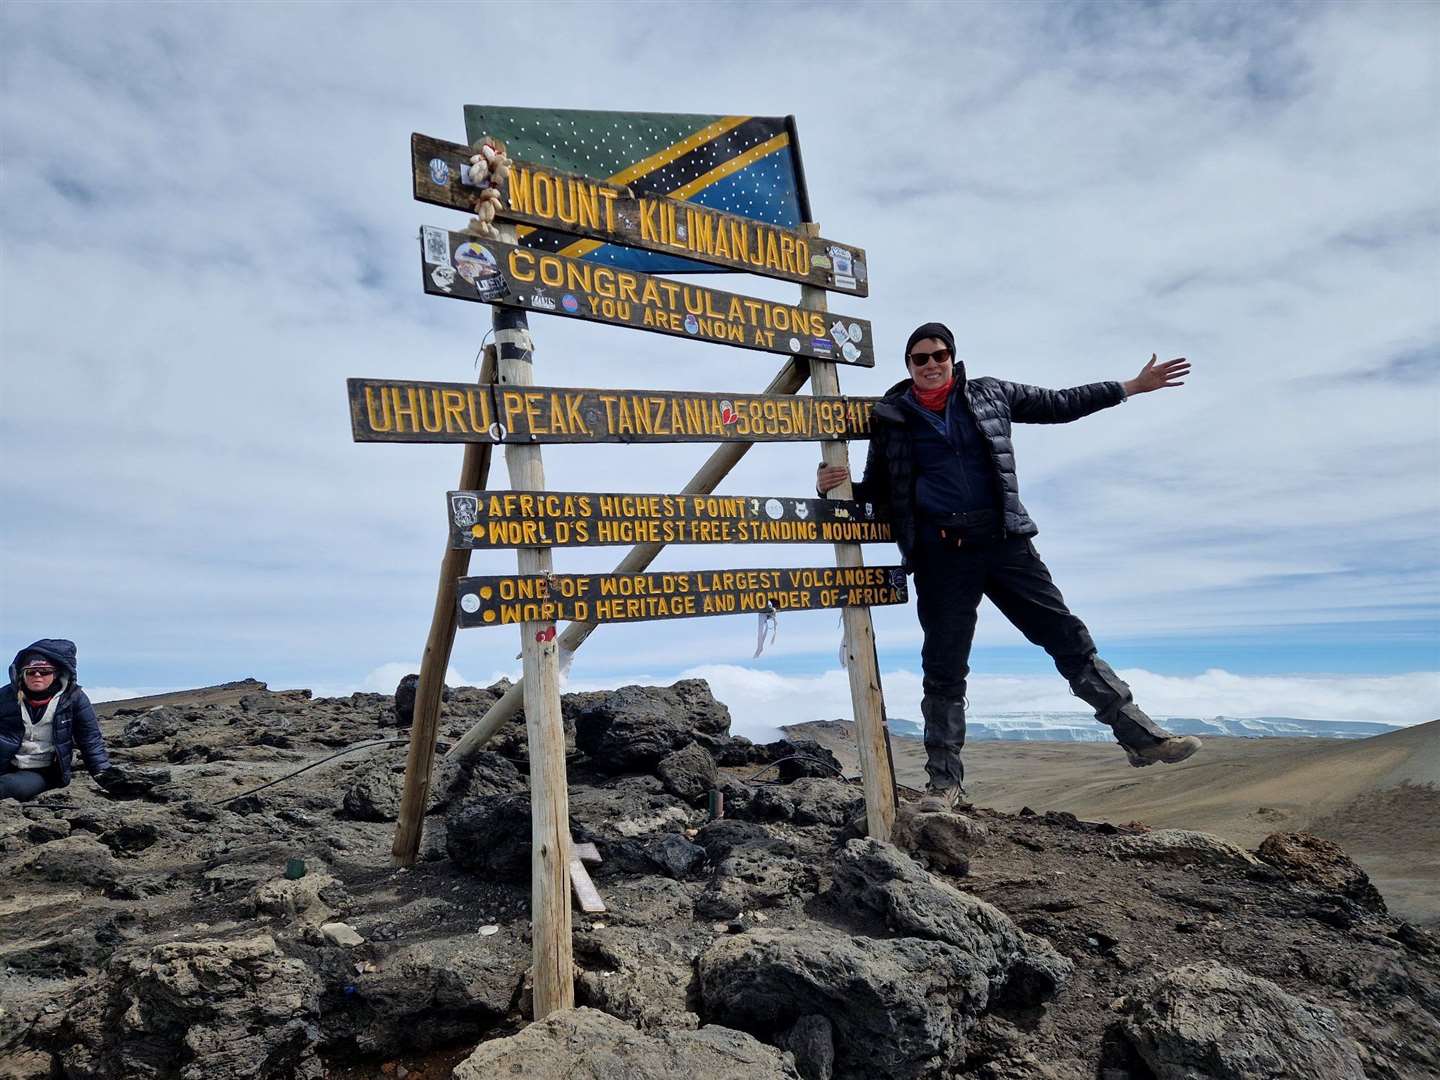 Tracey Crouch, the MP for Chatham and Aylesford, reached the summit of Mount Kilimanjaro. Picture: Tracey Crouch